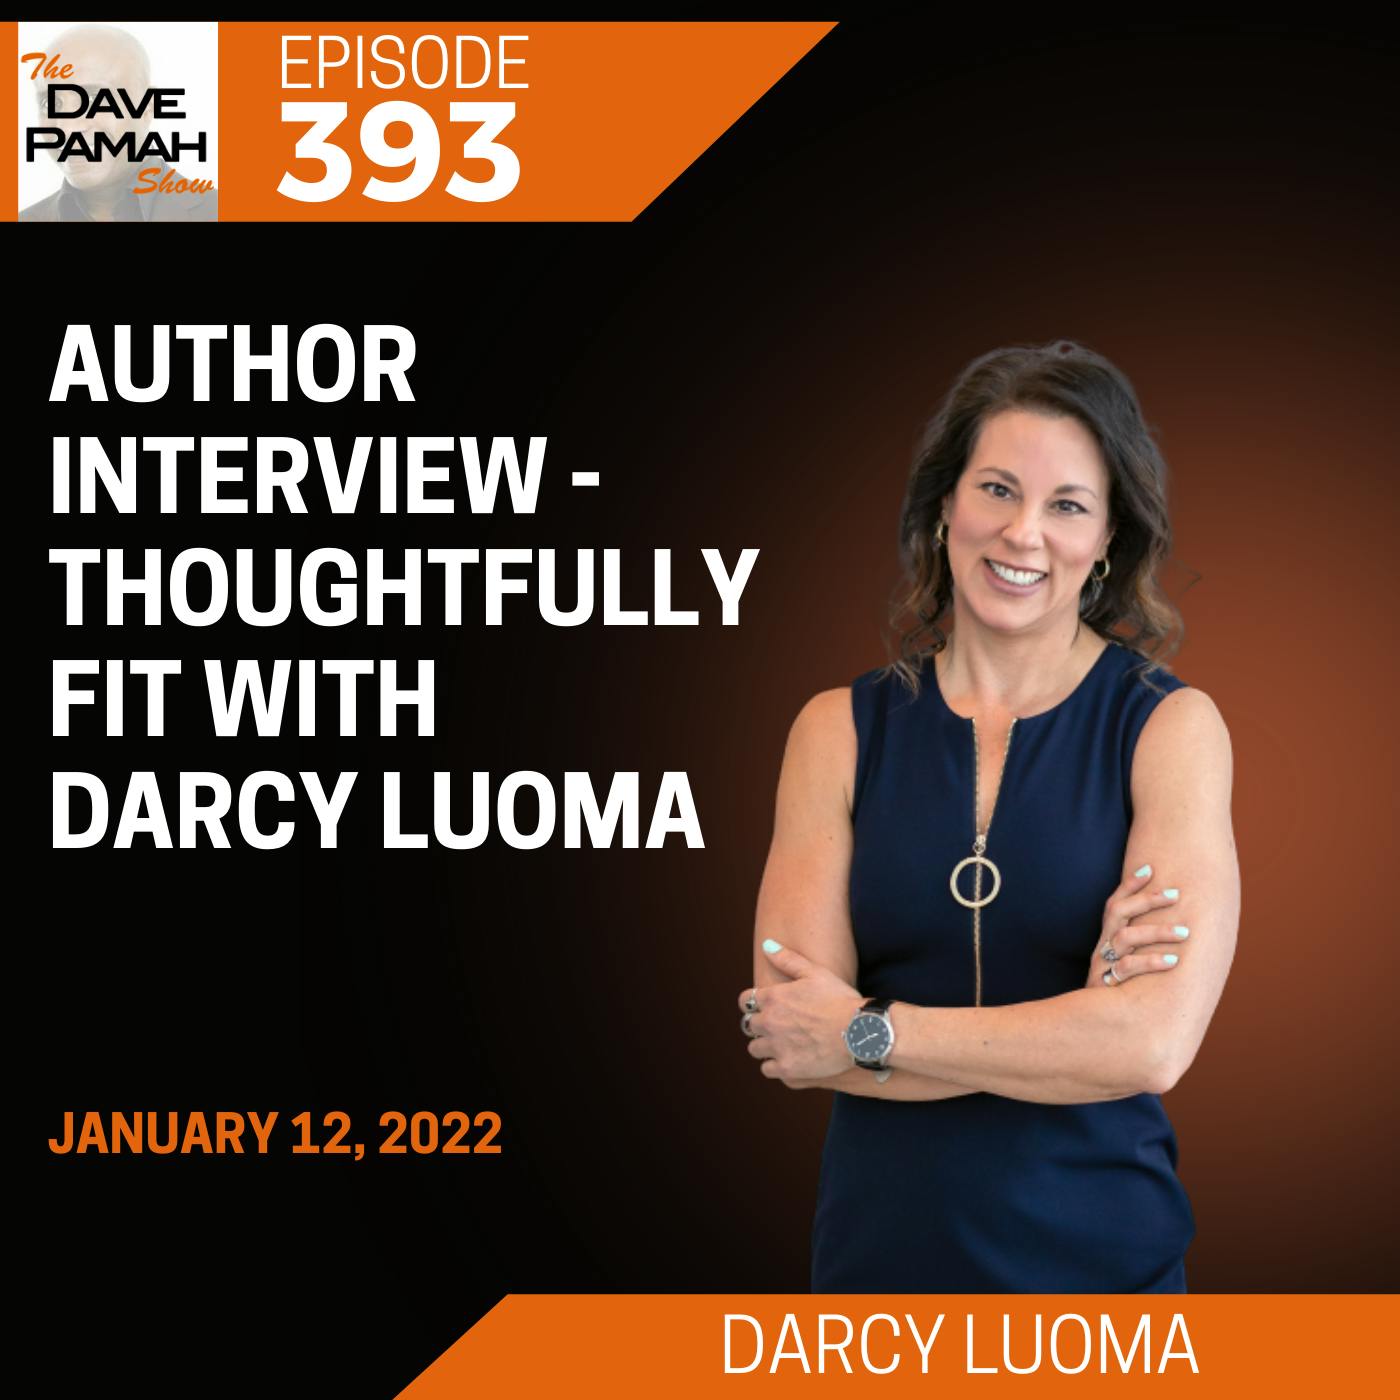 Author interview - Thoughtfully Fit with Darcy Luoma Image